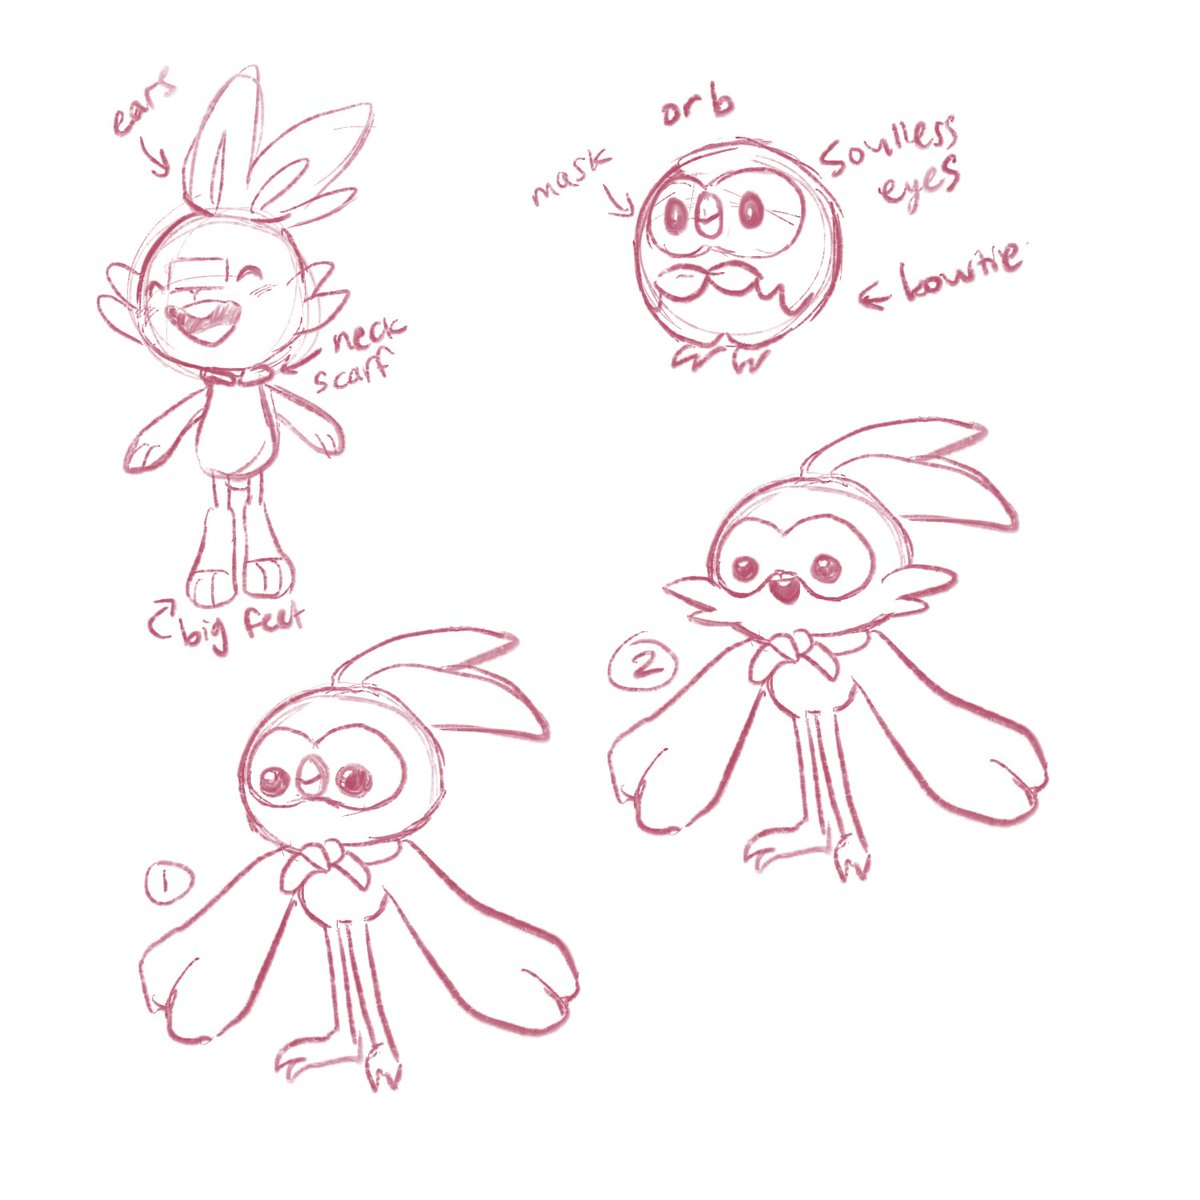 since we r talking about new pokémon here's my little fusions 